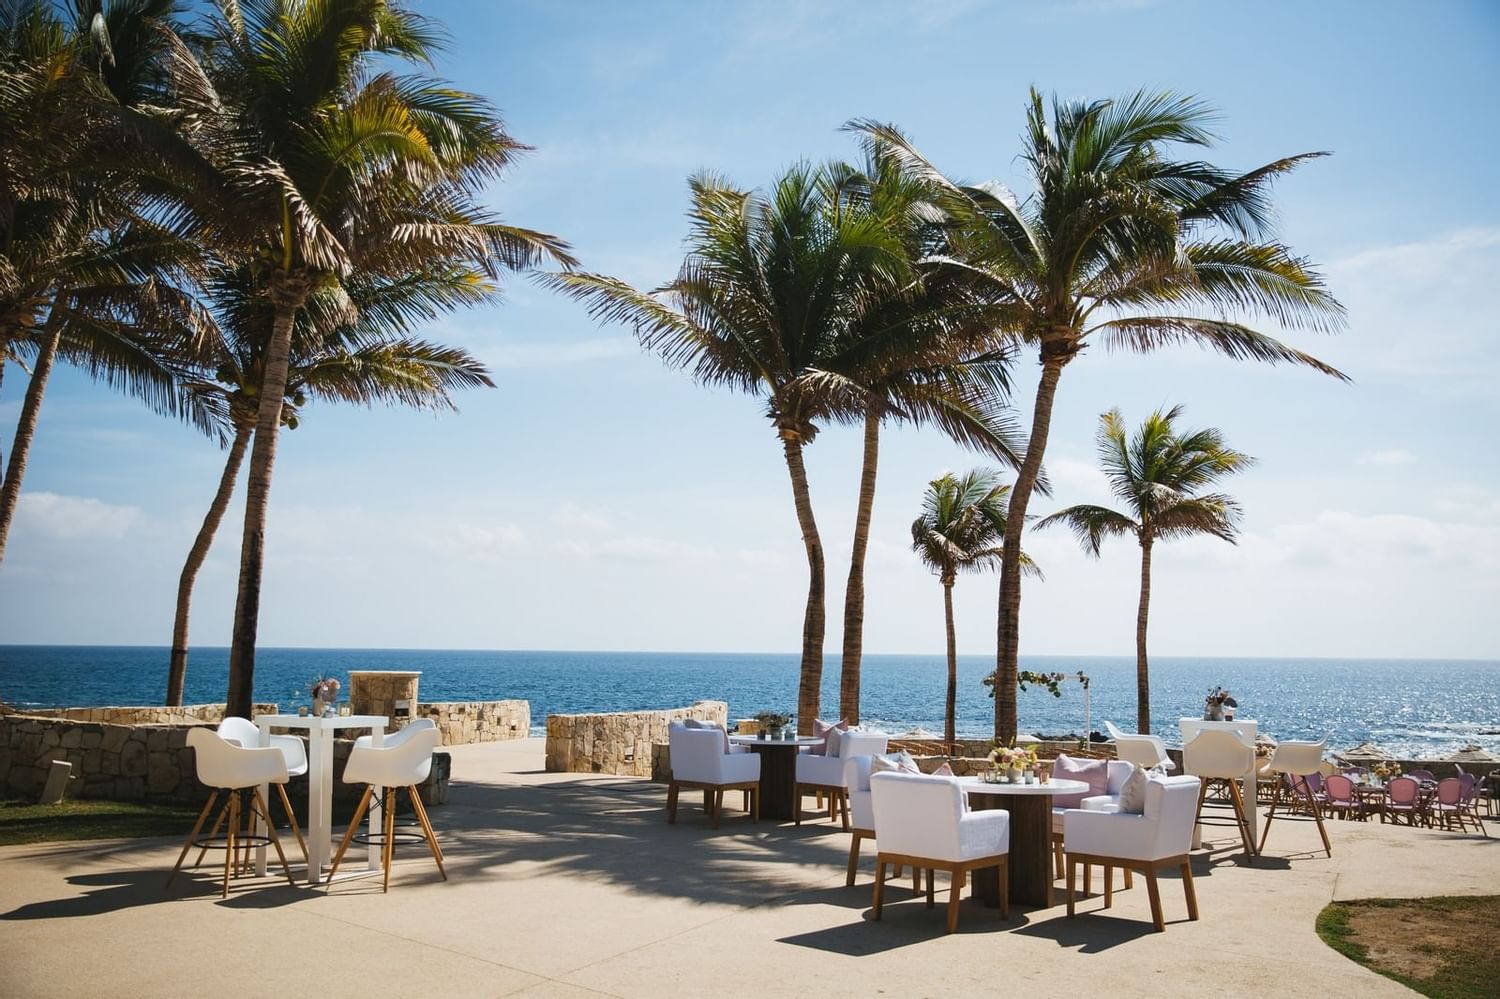 Outdoor dining with beach view from Fiesta Americana hotels